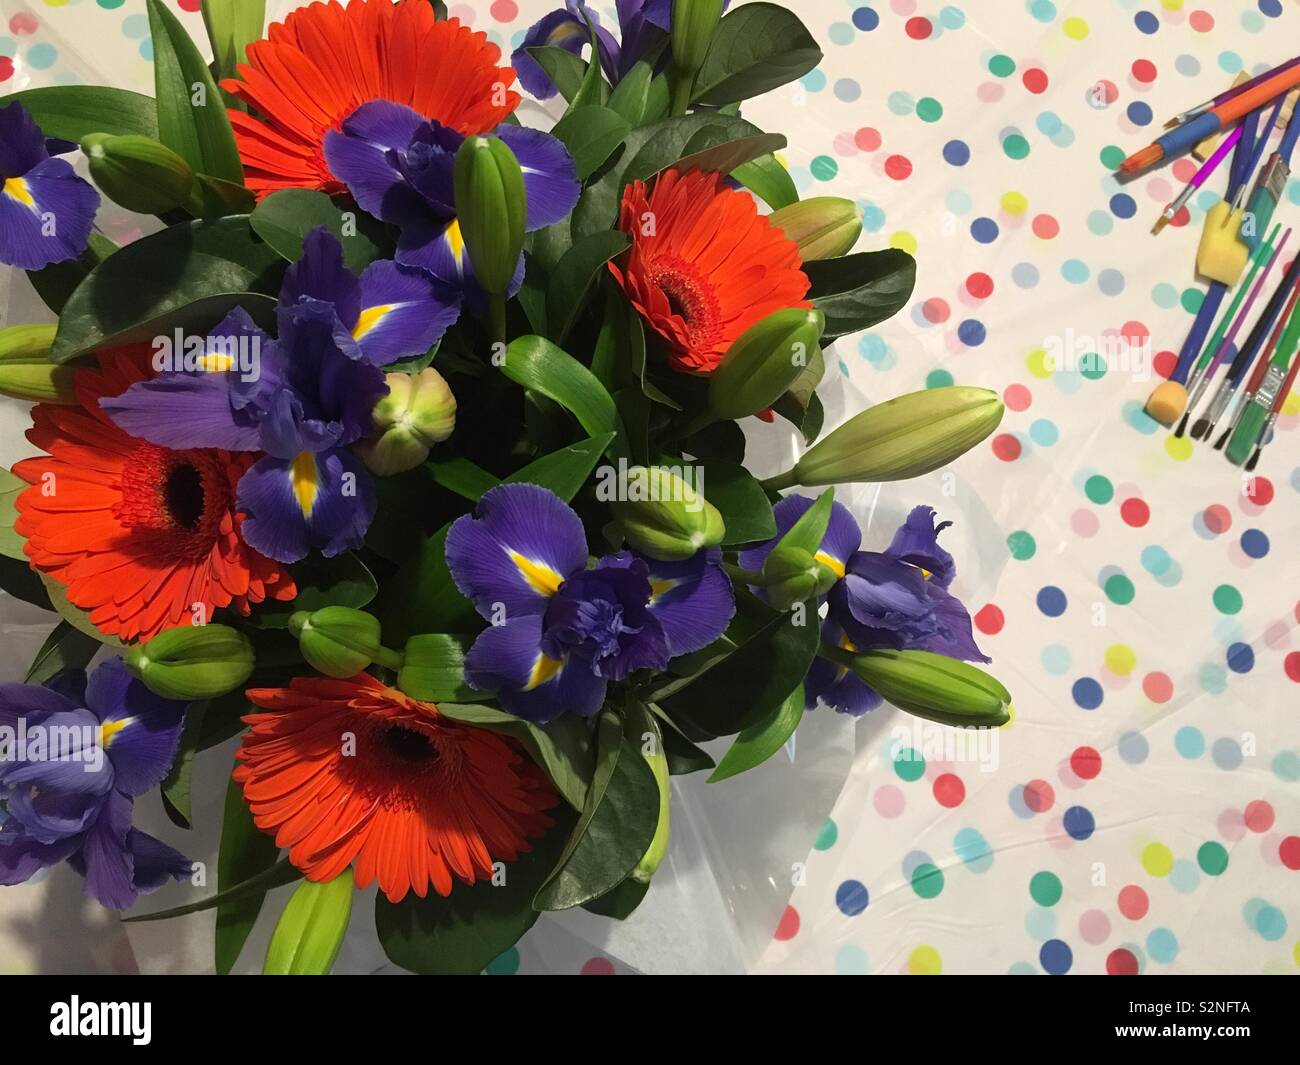 Gerberas, Irises and Lily Buds in a box near artists paint brushes which are all sitting on top of a plastic colourful polka dotted table cover. Stock Photo